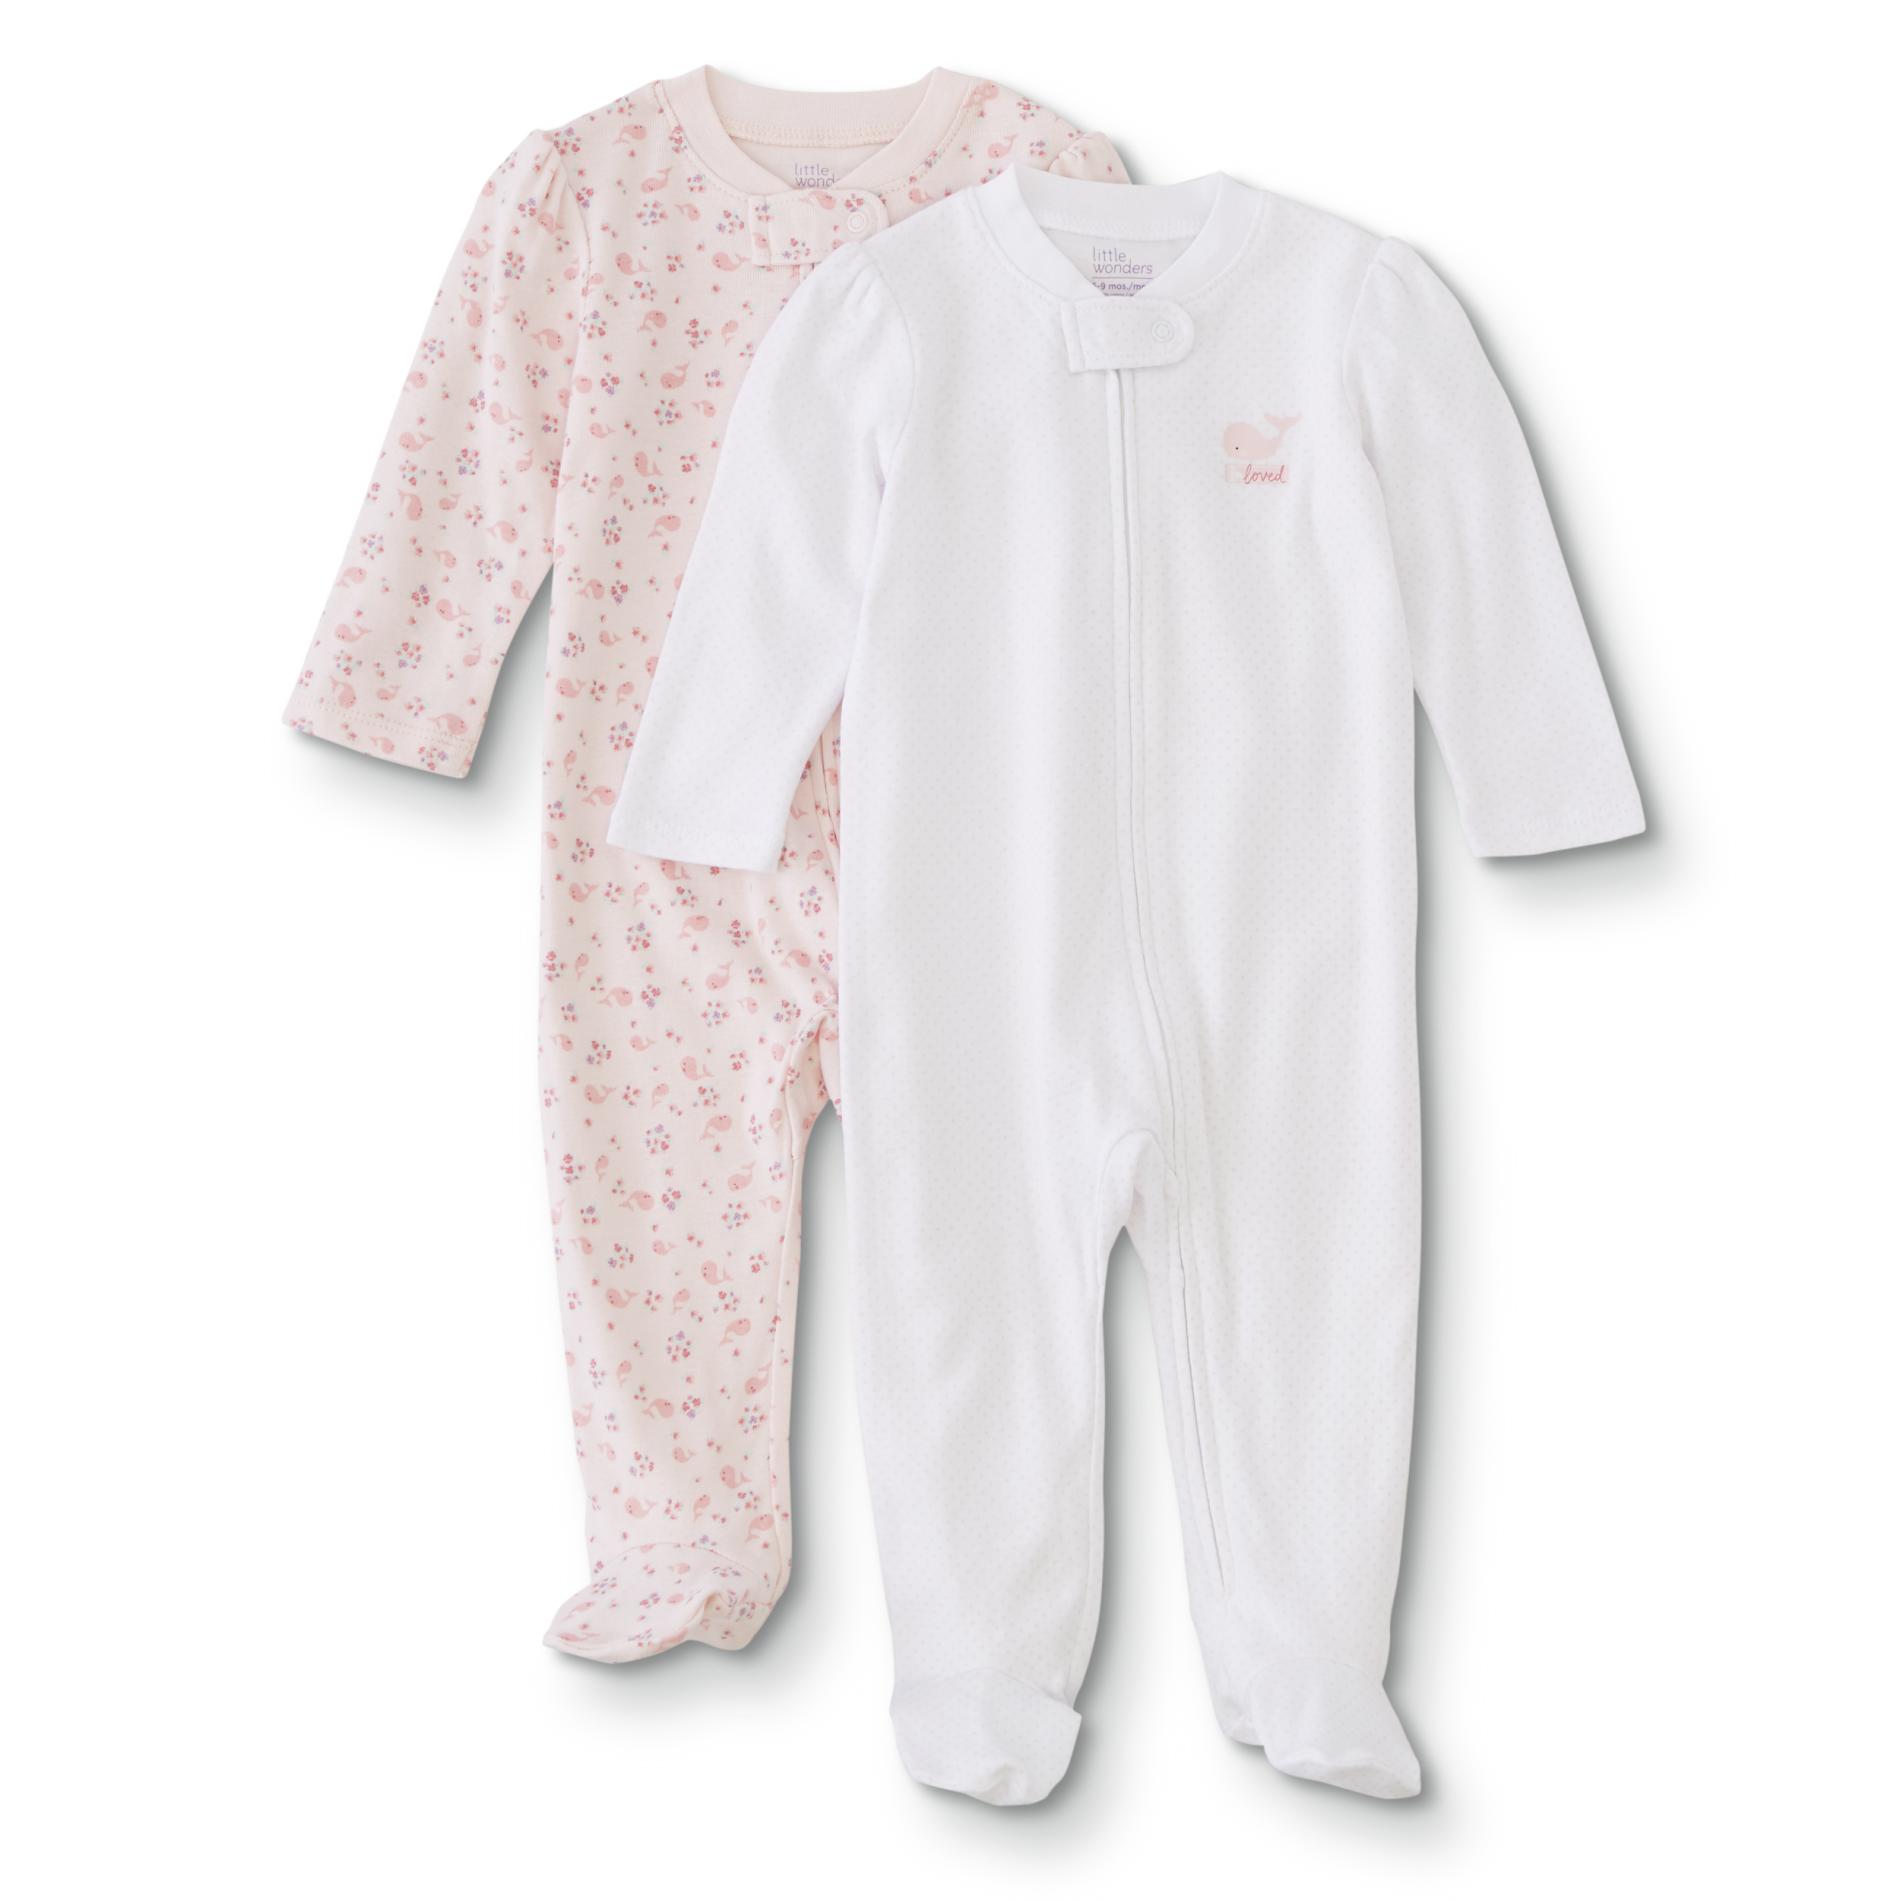 Little Wonders Infant Girls' 2-Pack Footed Pajamas - Floral/Whales/Dots